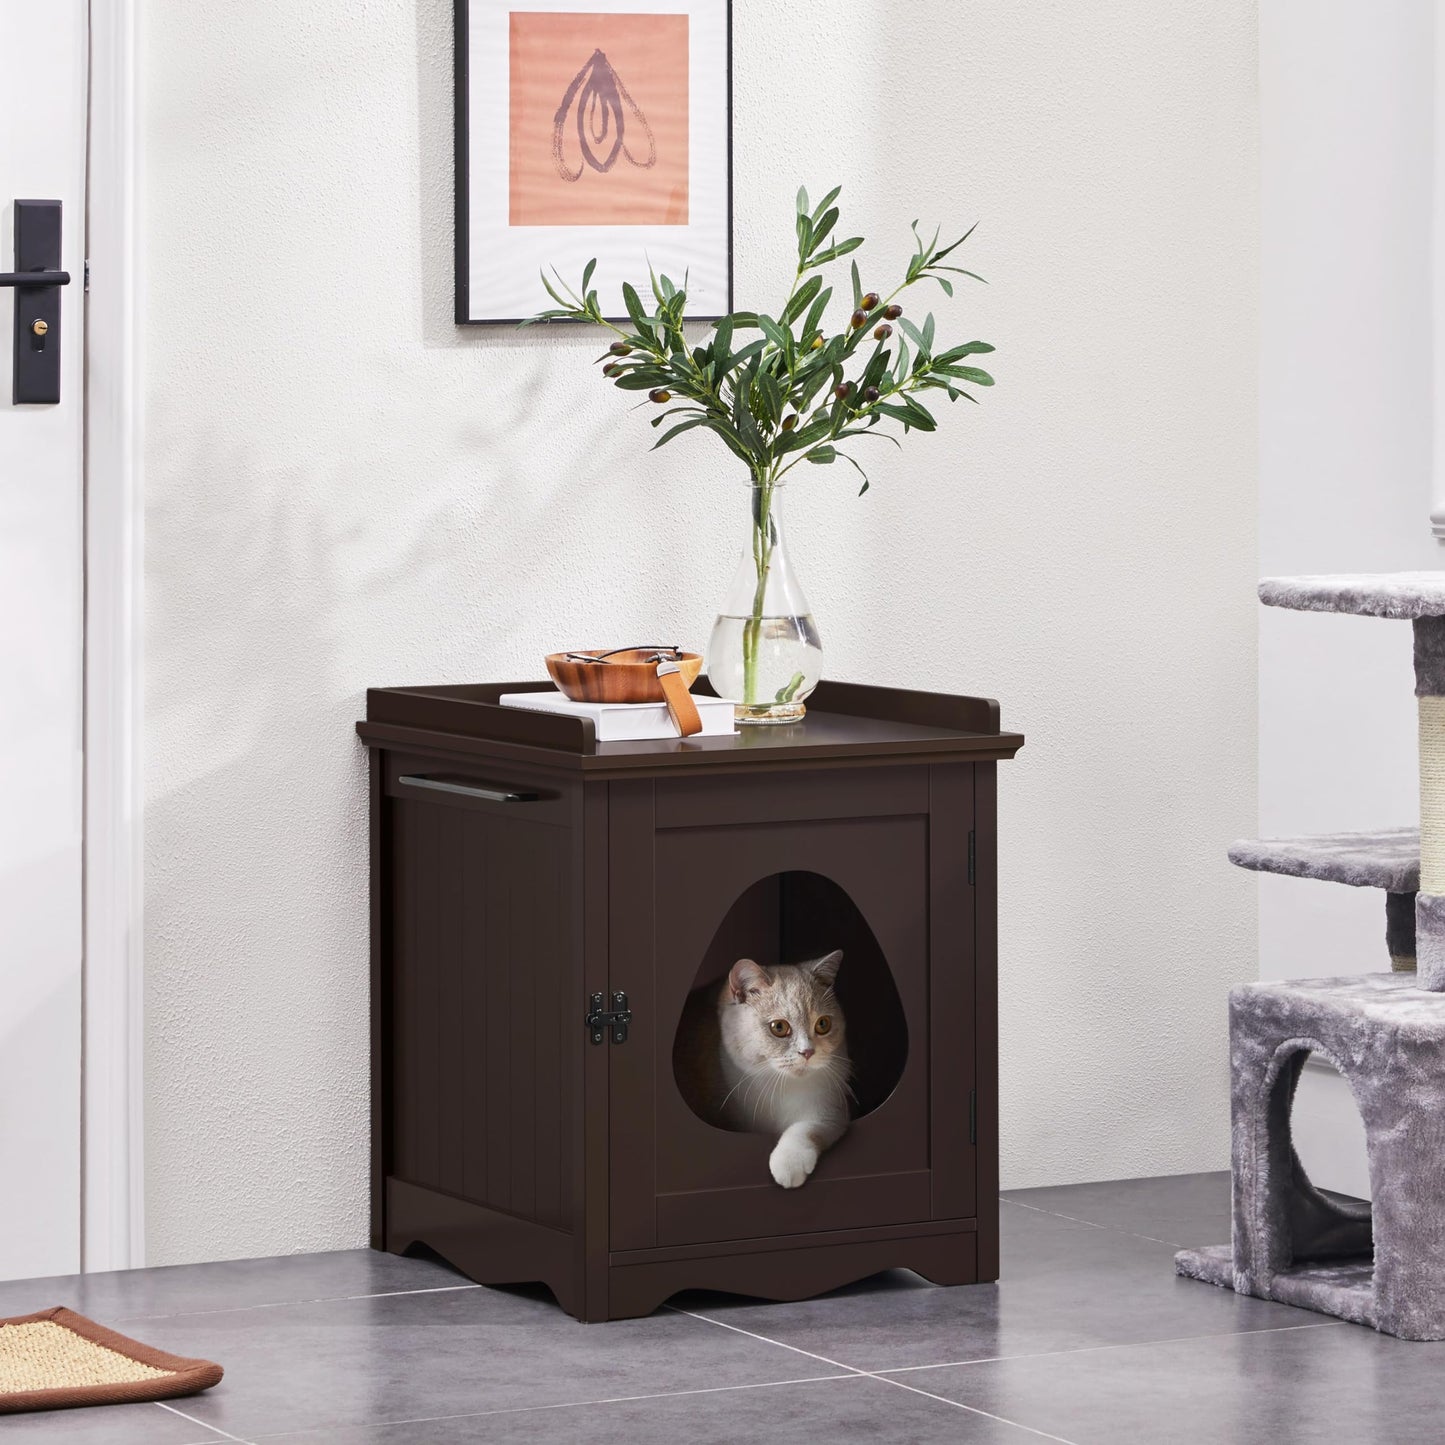 Yaheetech Cat Litter Box Enclosure, Hidden Cat Litter Box Furniture with Side Towel Bar, Wooden Cat Washroom, Storage Cabinet, Indoor Pet House, Side Table Nightstand, Espresso